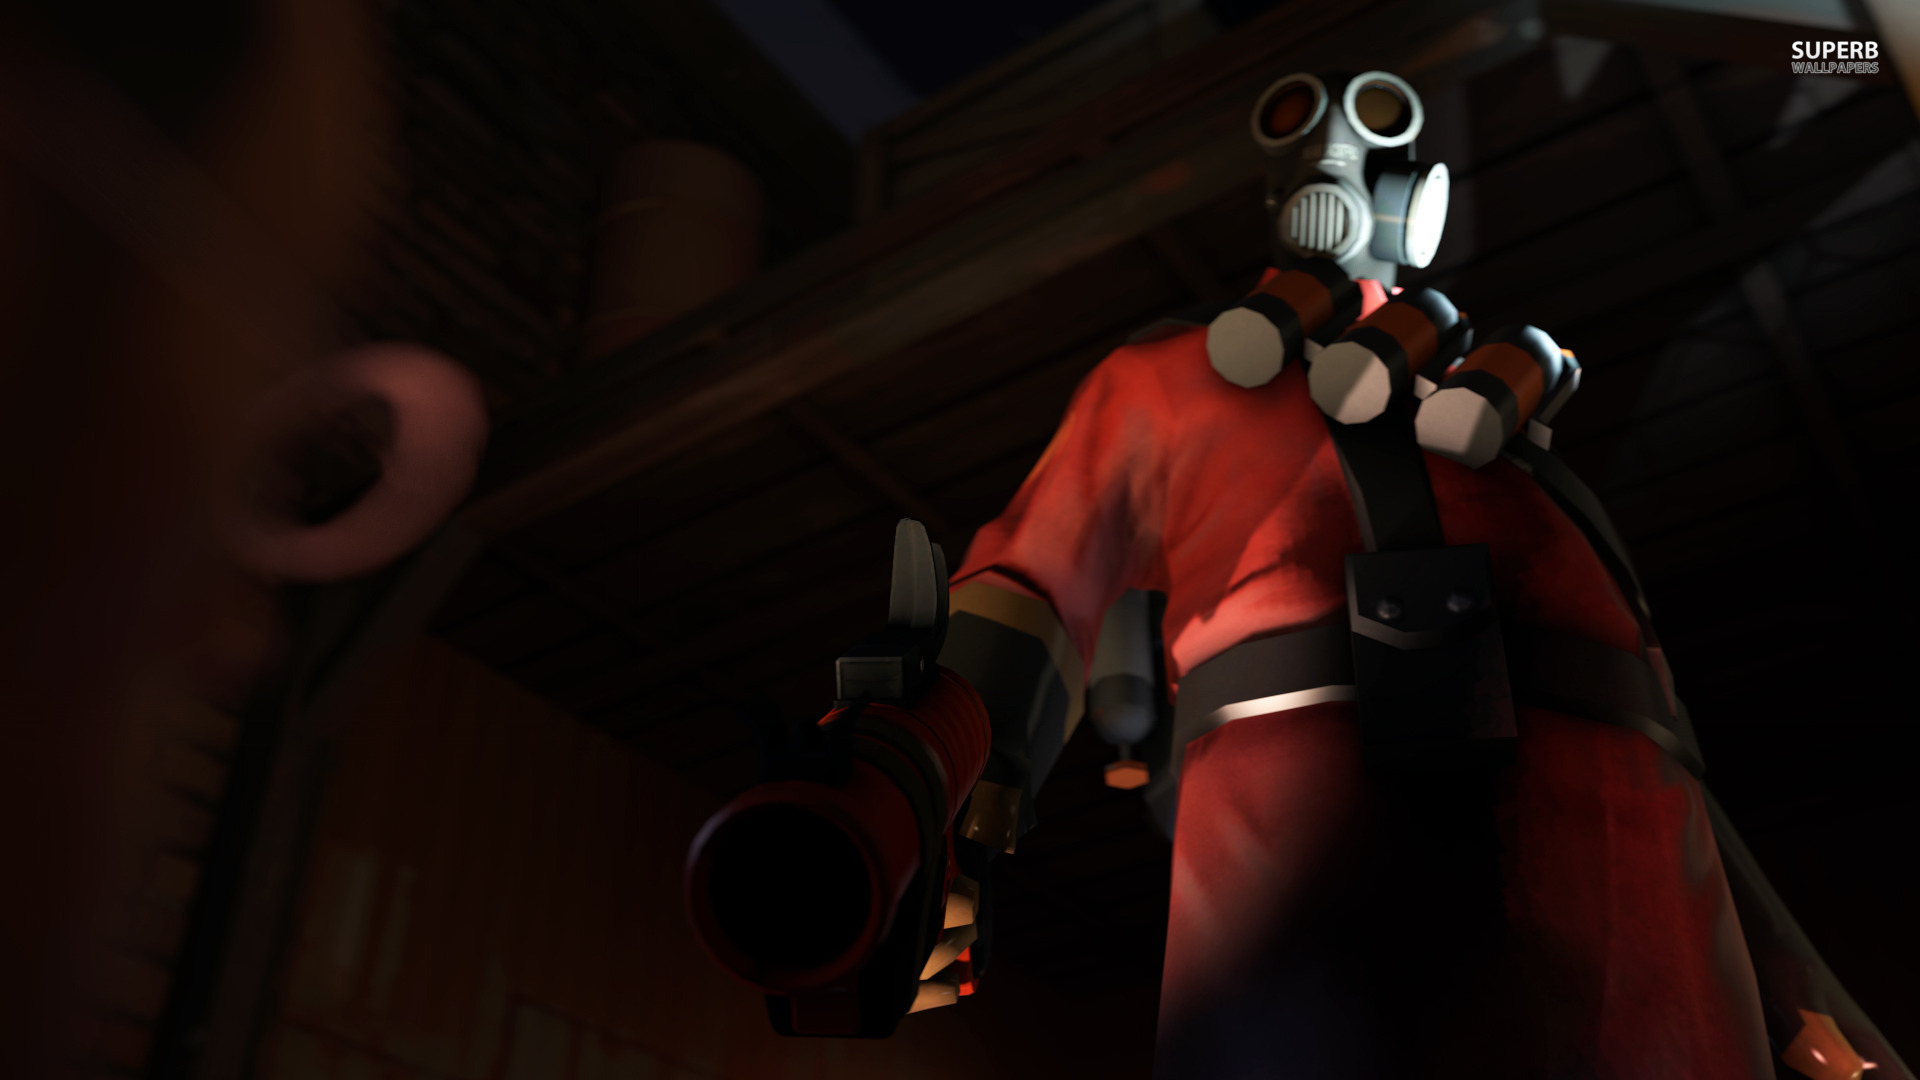 Team Fortress 2 wallpaper - Game wallpapers - #20873